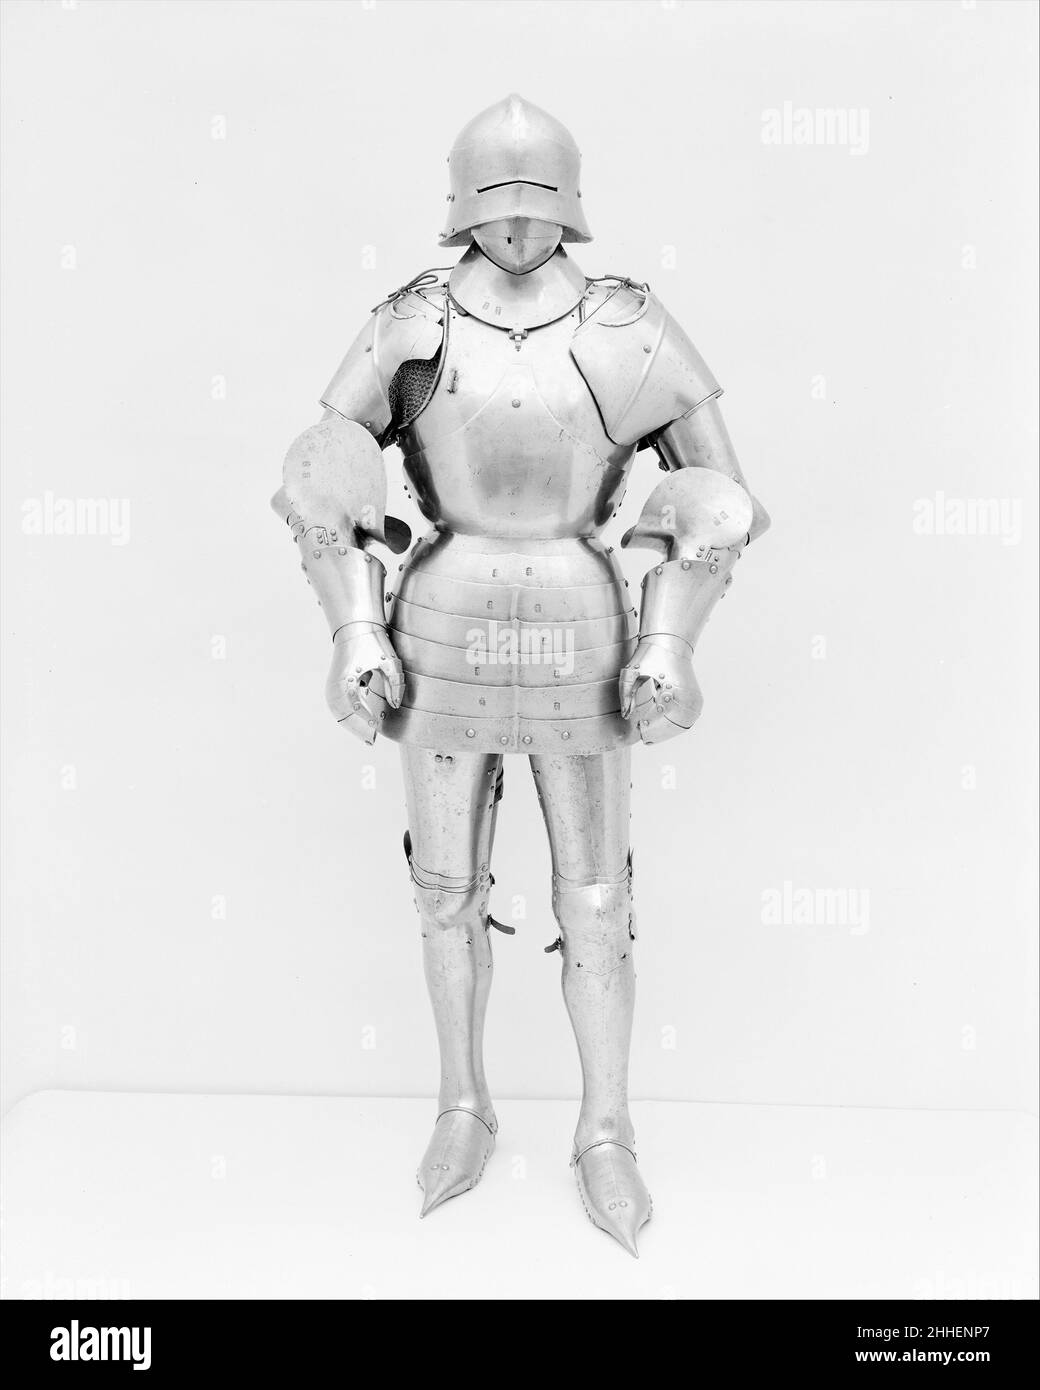 Armor in the style of the 15th century ca. 1450 and ca. 1850 Italian. Armor in the style of the 15th century  22003 Stock Photo